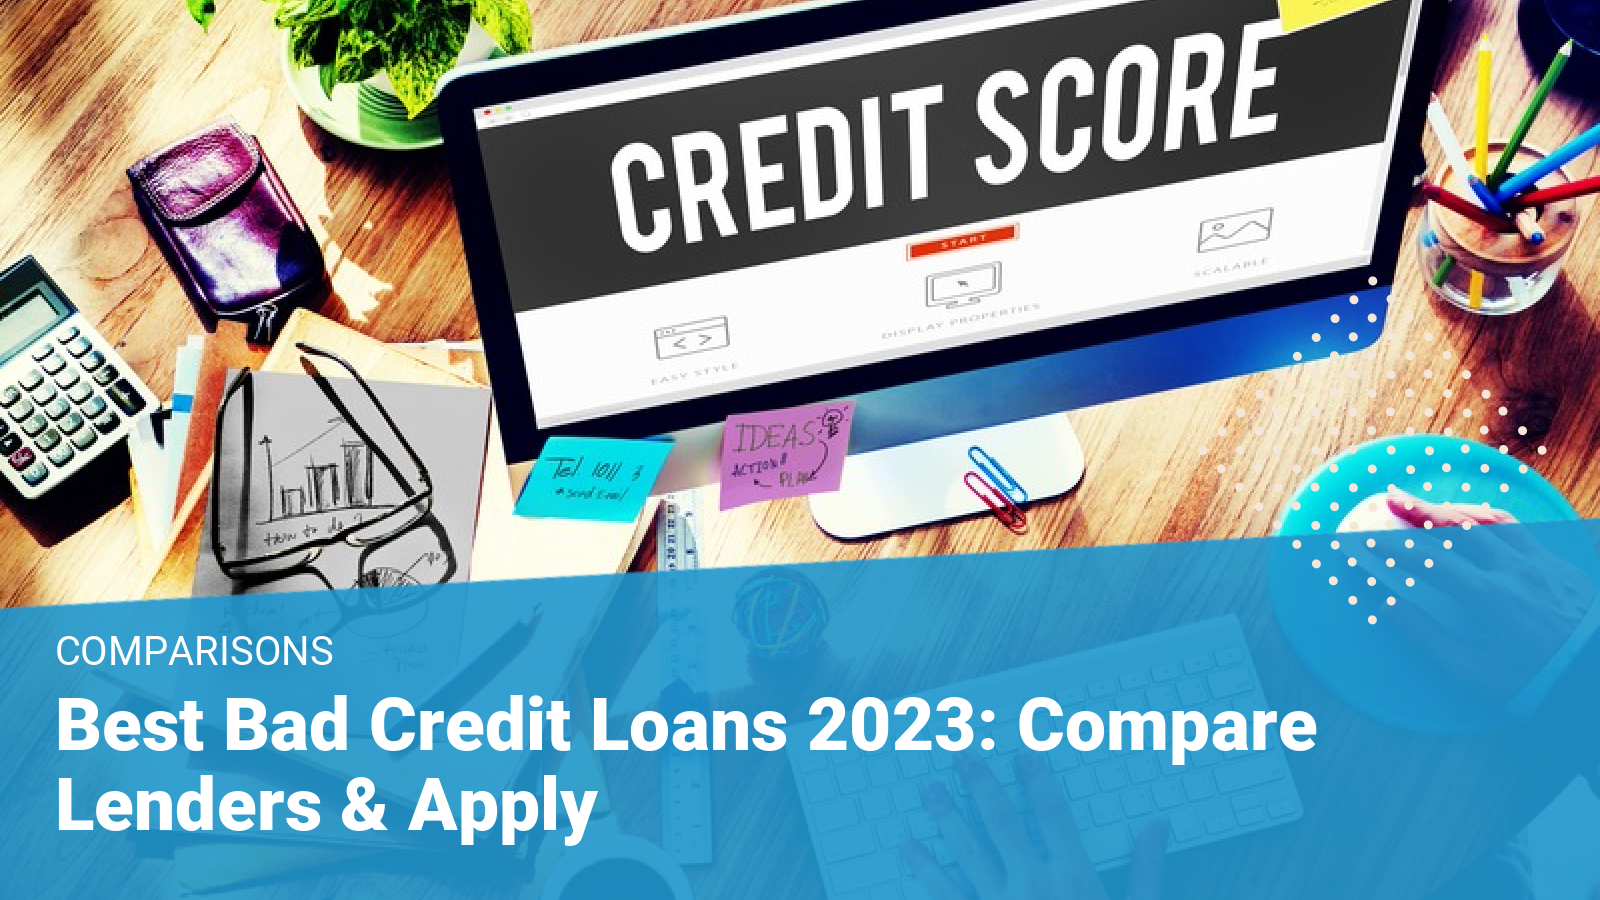 Ce23ba25 Best Bad Credit Loans 2023 Compare Lenders Apply 